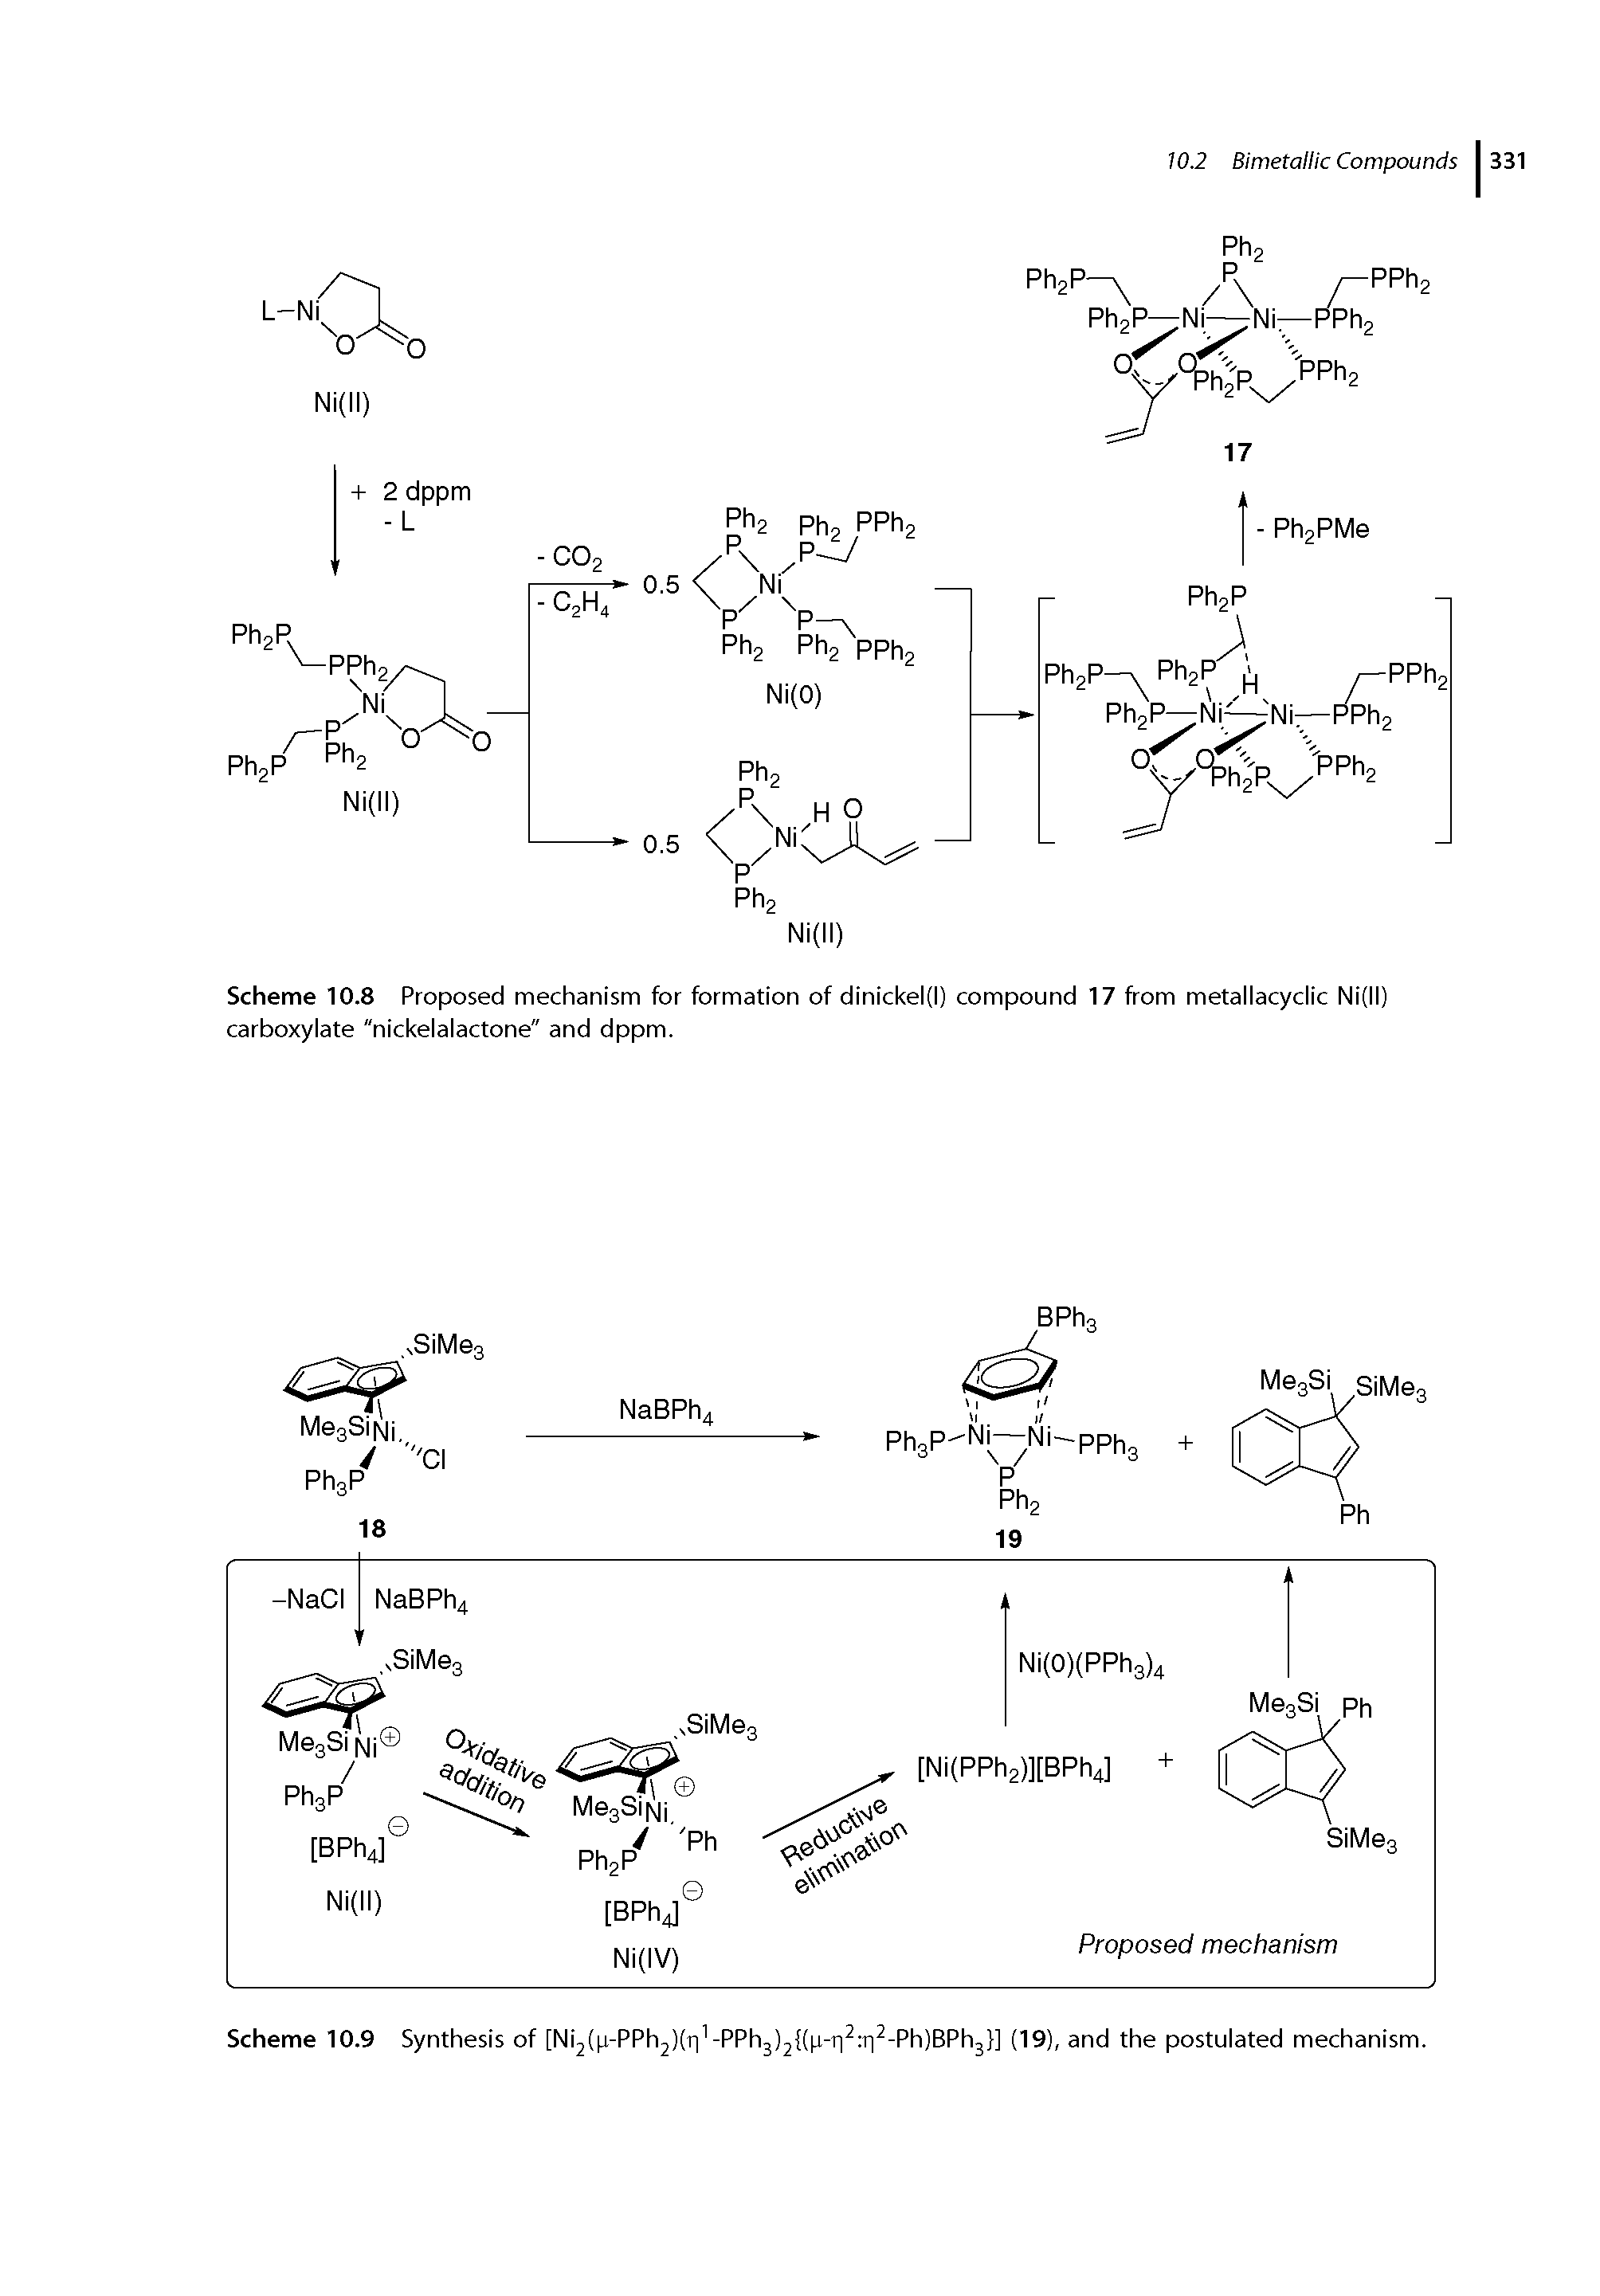 Scheme 10.8 Proposed mechanism for formation of dinickel(l) compound 17 from metallacydic Ni(ll) carboxylate "nickelalactone" and dppm.